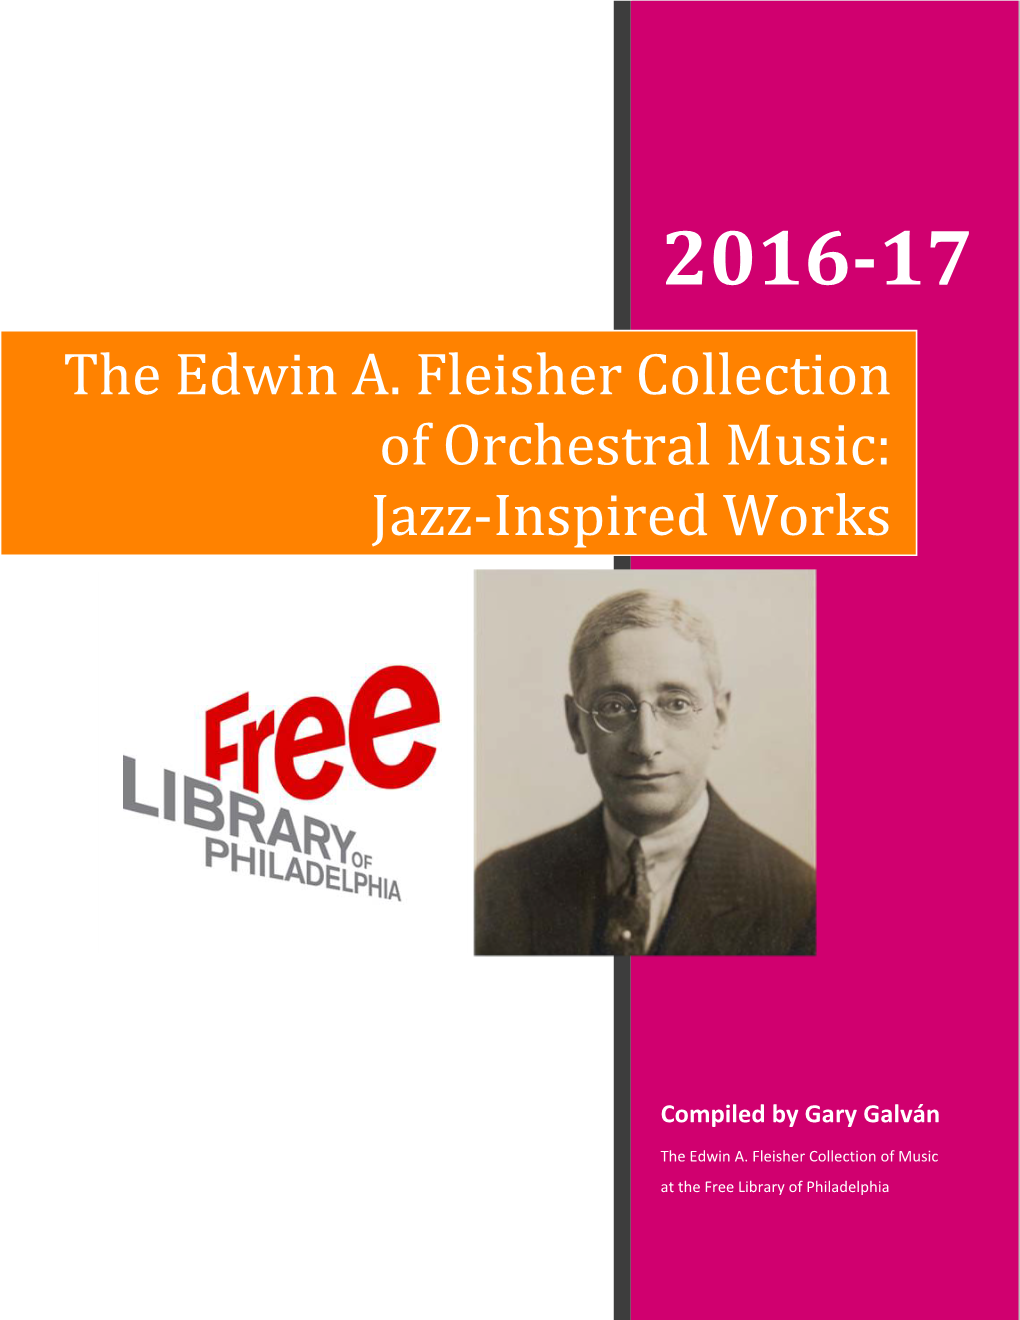 The Edwin A. Fleisher Collection of Orchestral Music: Jazz-Inspired Works